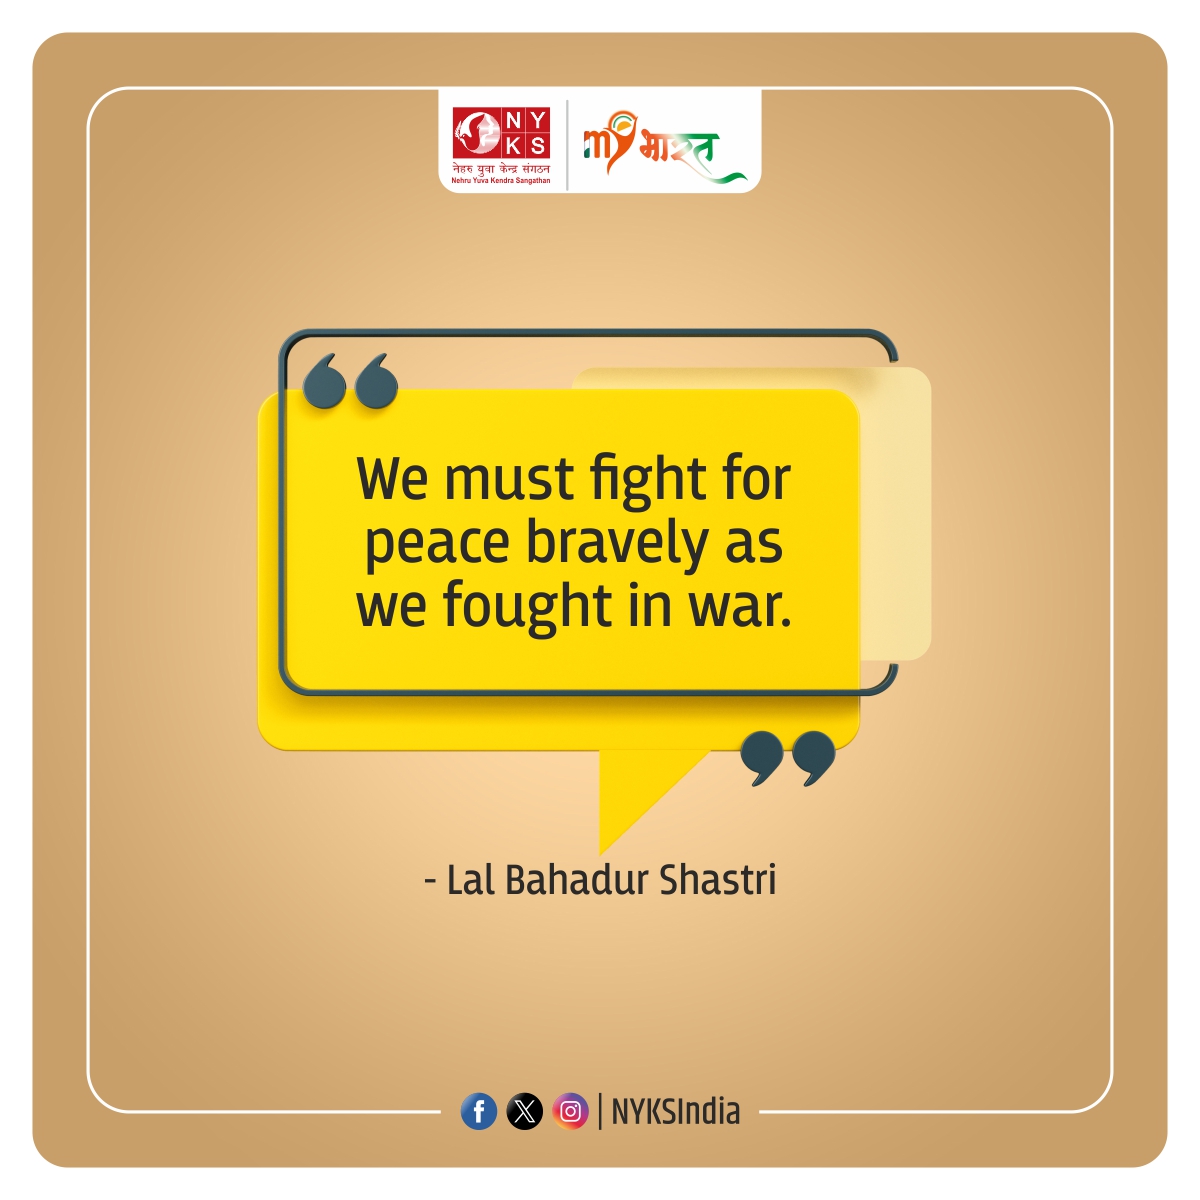 Quote of the Day! Let's approach the pursuit of peace with the same courage and resolve we display in times of conflict. #quoteoftheday #SundayMotivation #StrengthInUnity #NYKS @Anurag_Office @ianuragthakur @YASMinistry @NisithPramanik @NITKM2021 @mybharatgov @motivational